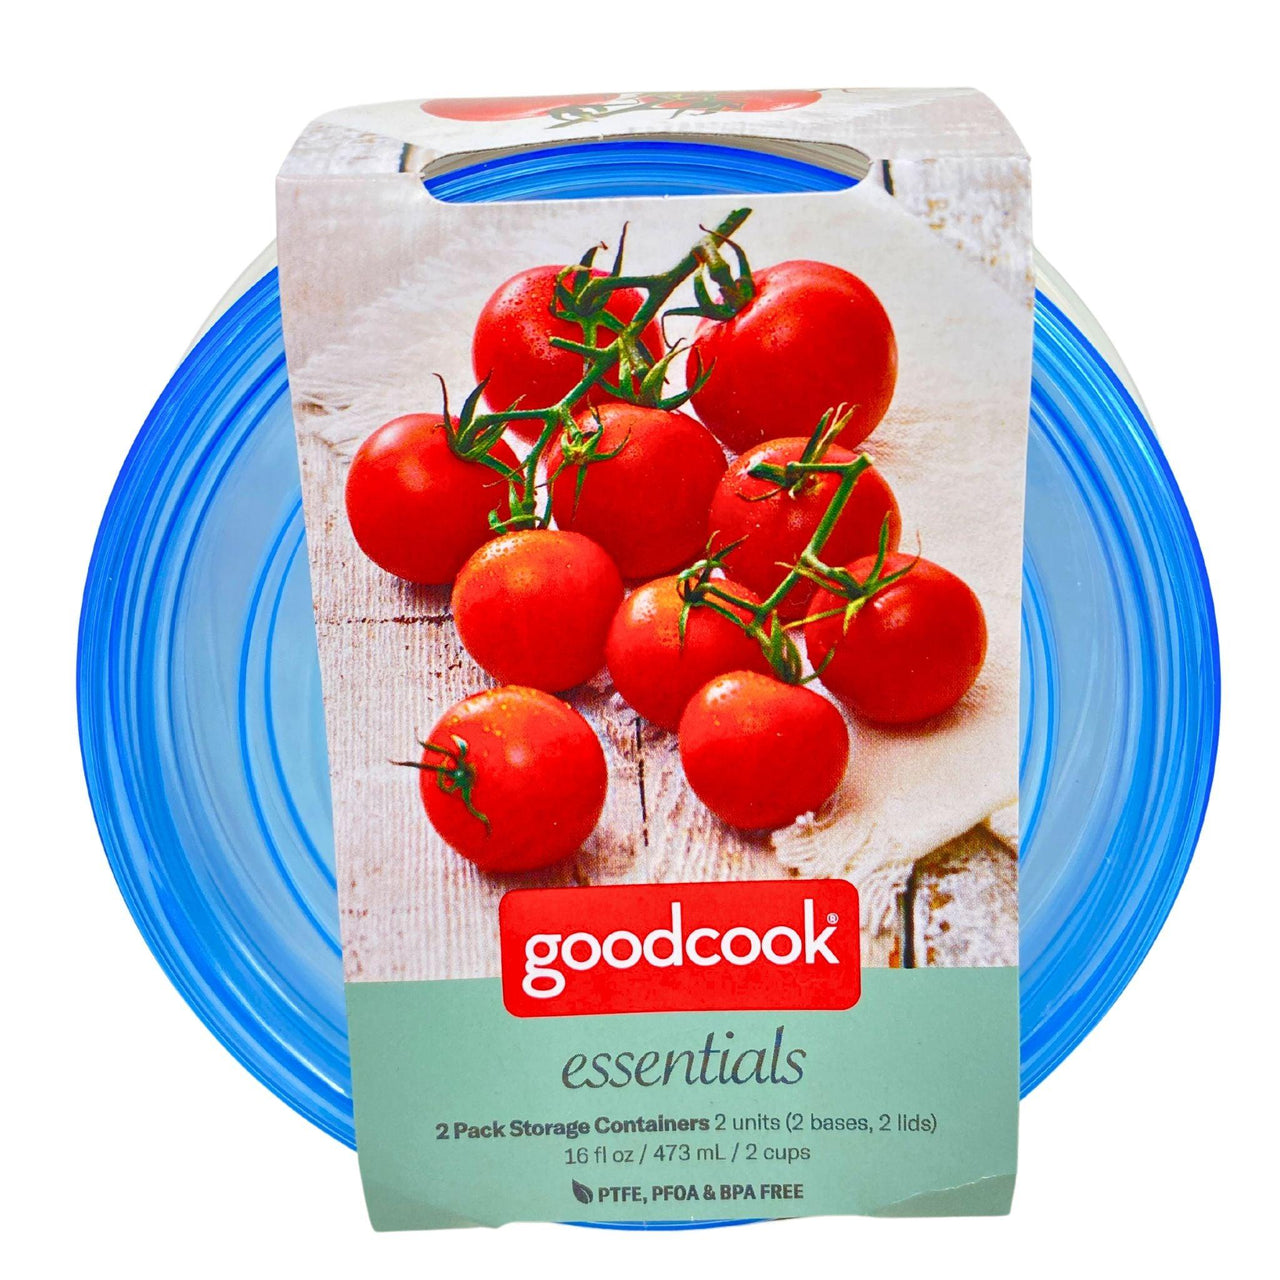 Goodcook Essentials 2 Pack Storage Containers Ptfe,Pfoa & Bpa Free (71 Pcs lot) - Discount Wholesalers Inc